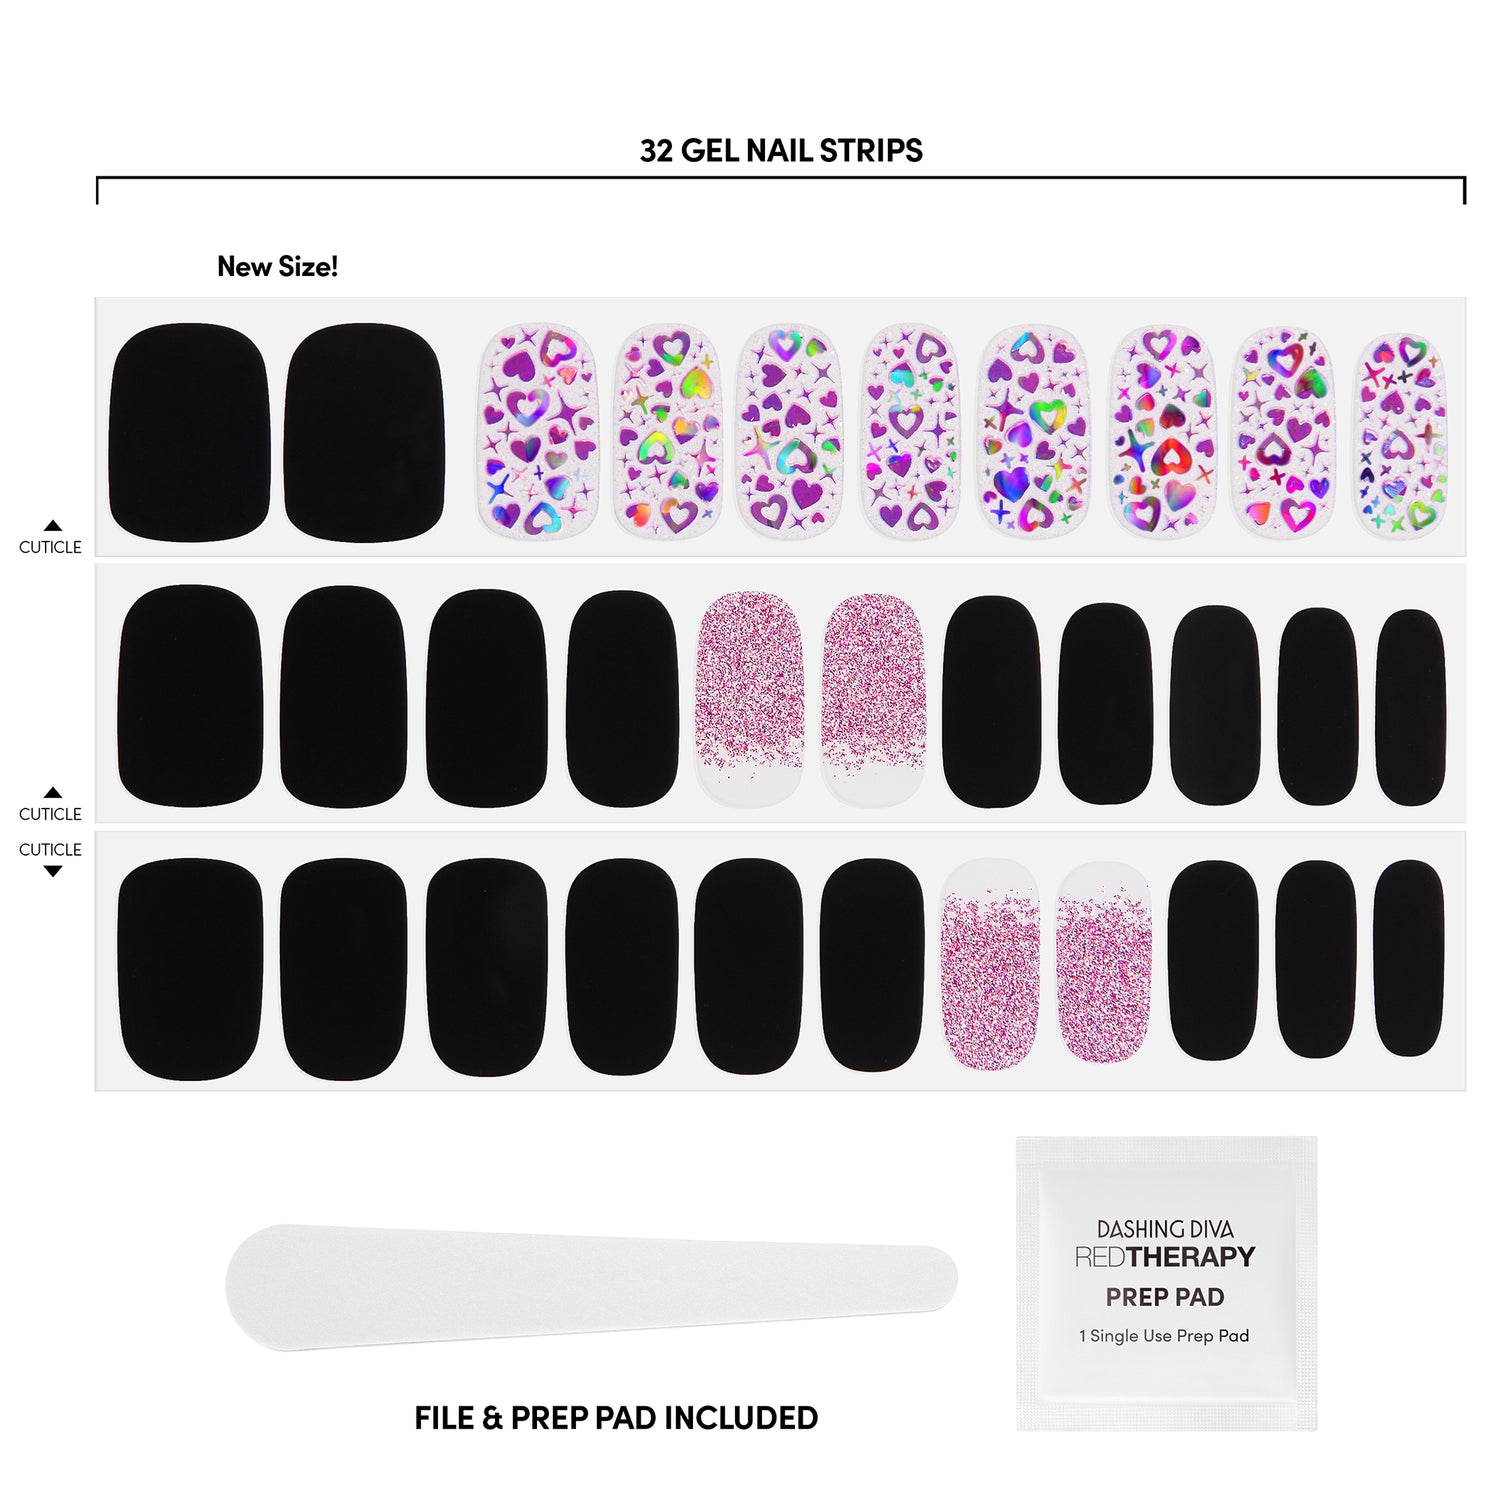 Call me cute or don't call me at all. Black & clear gel nail strips featuring a glitter ombré french, iridescent glitter, and holographic hearts with a glossy, high-shine finish.